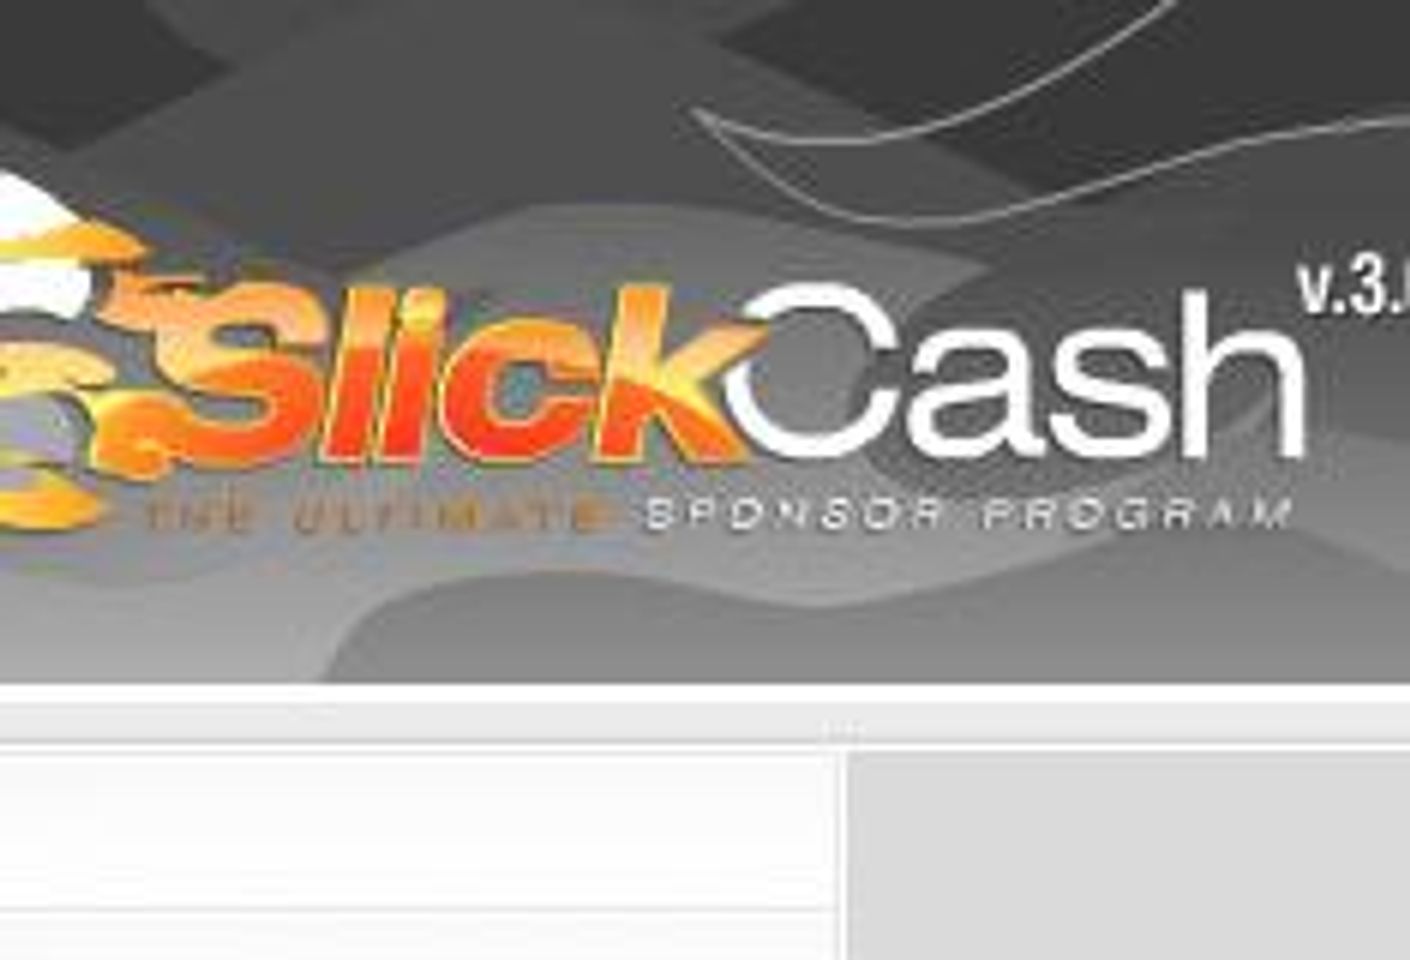 SlickCash to Give Away Free Laptops